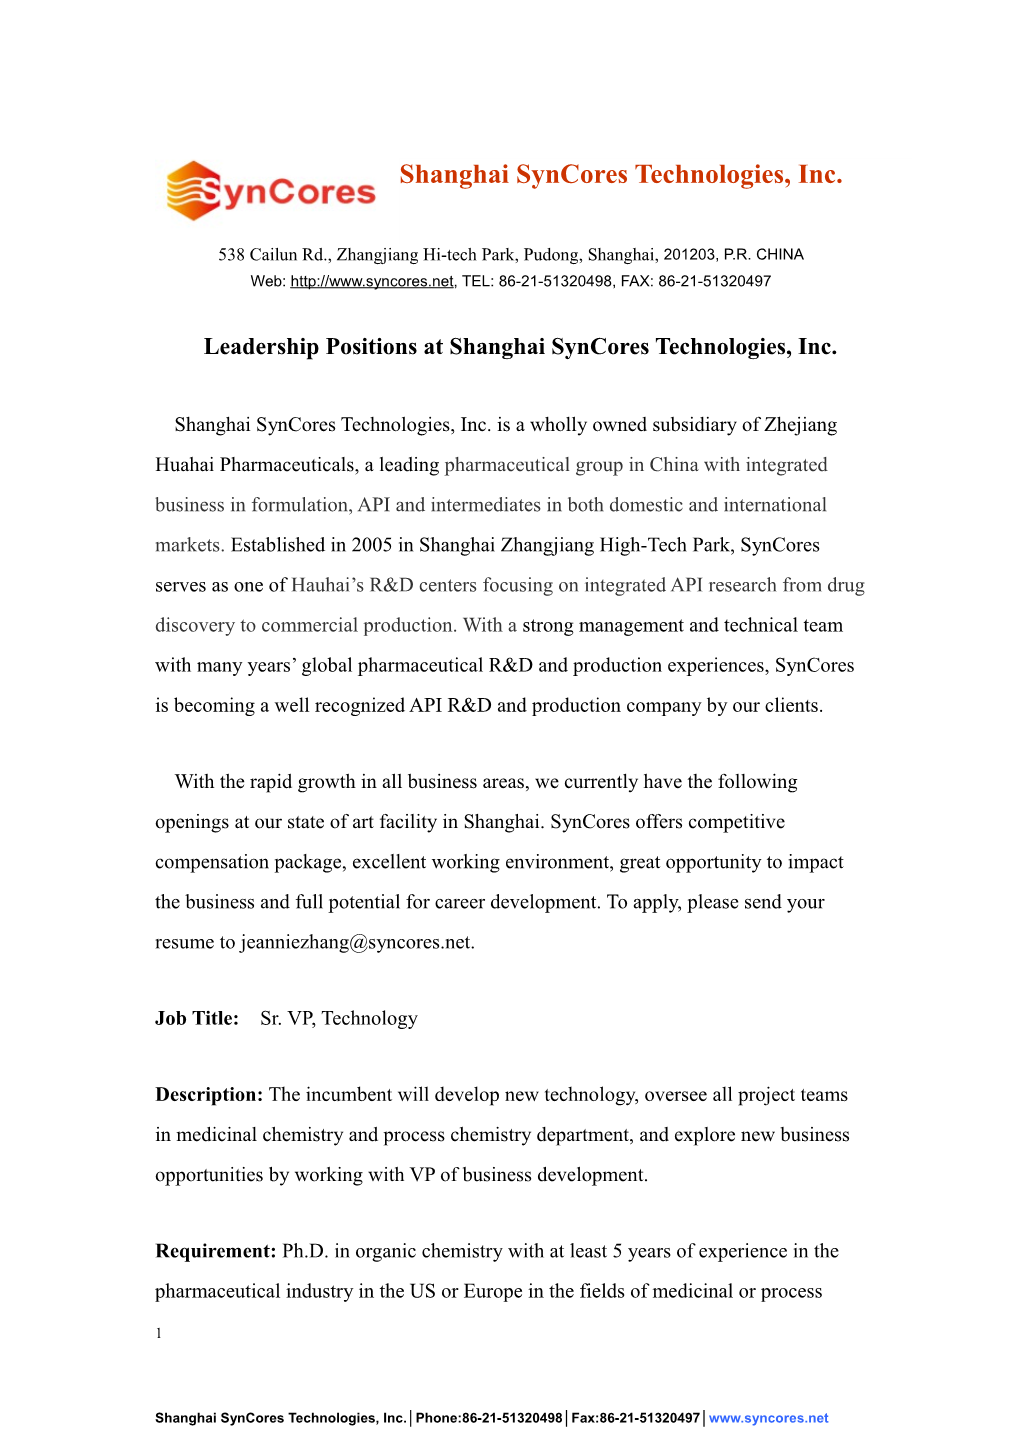 Leadership Positions at Shanghai Syncores Technologies, Inc